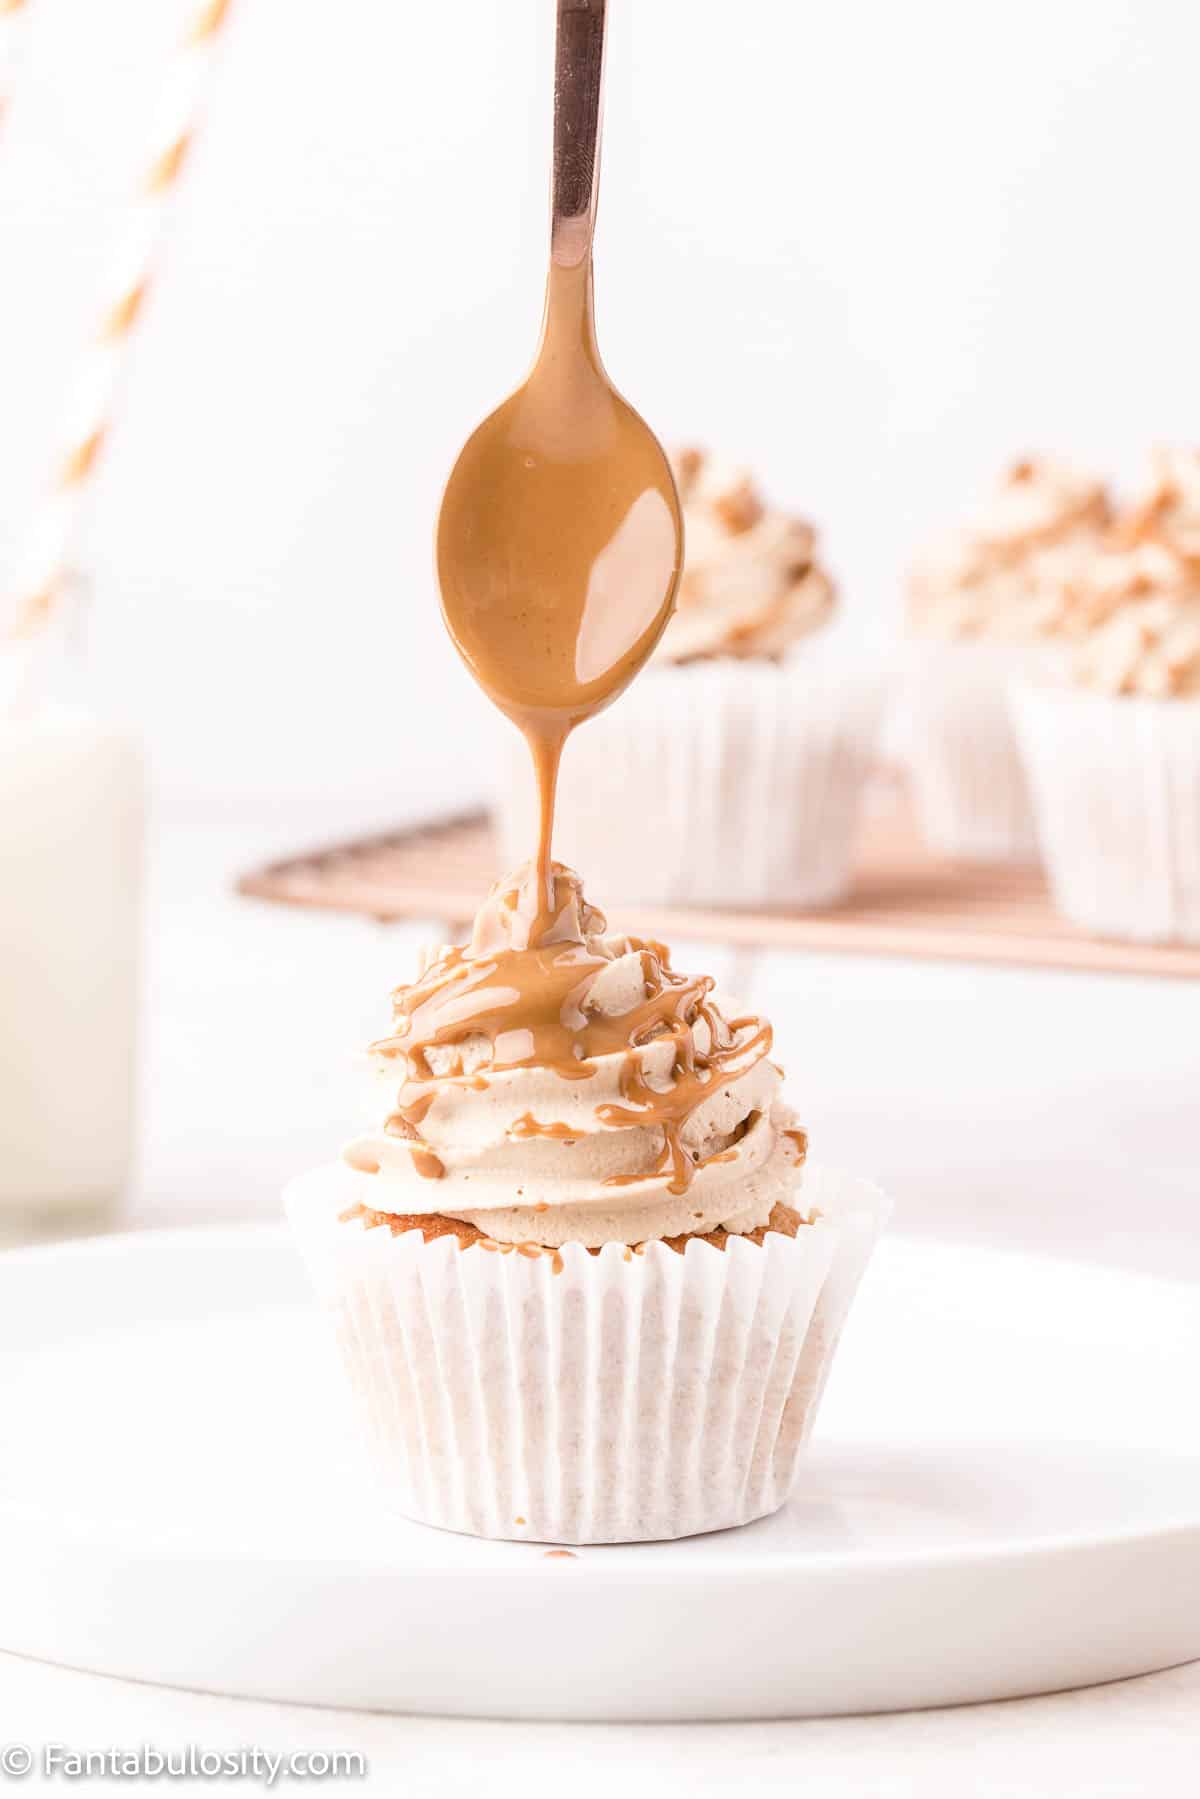 A spoon with melted cookie butter is drizzling the Biscoff spread over a frosted cupcake